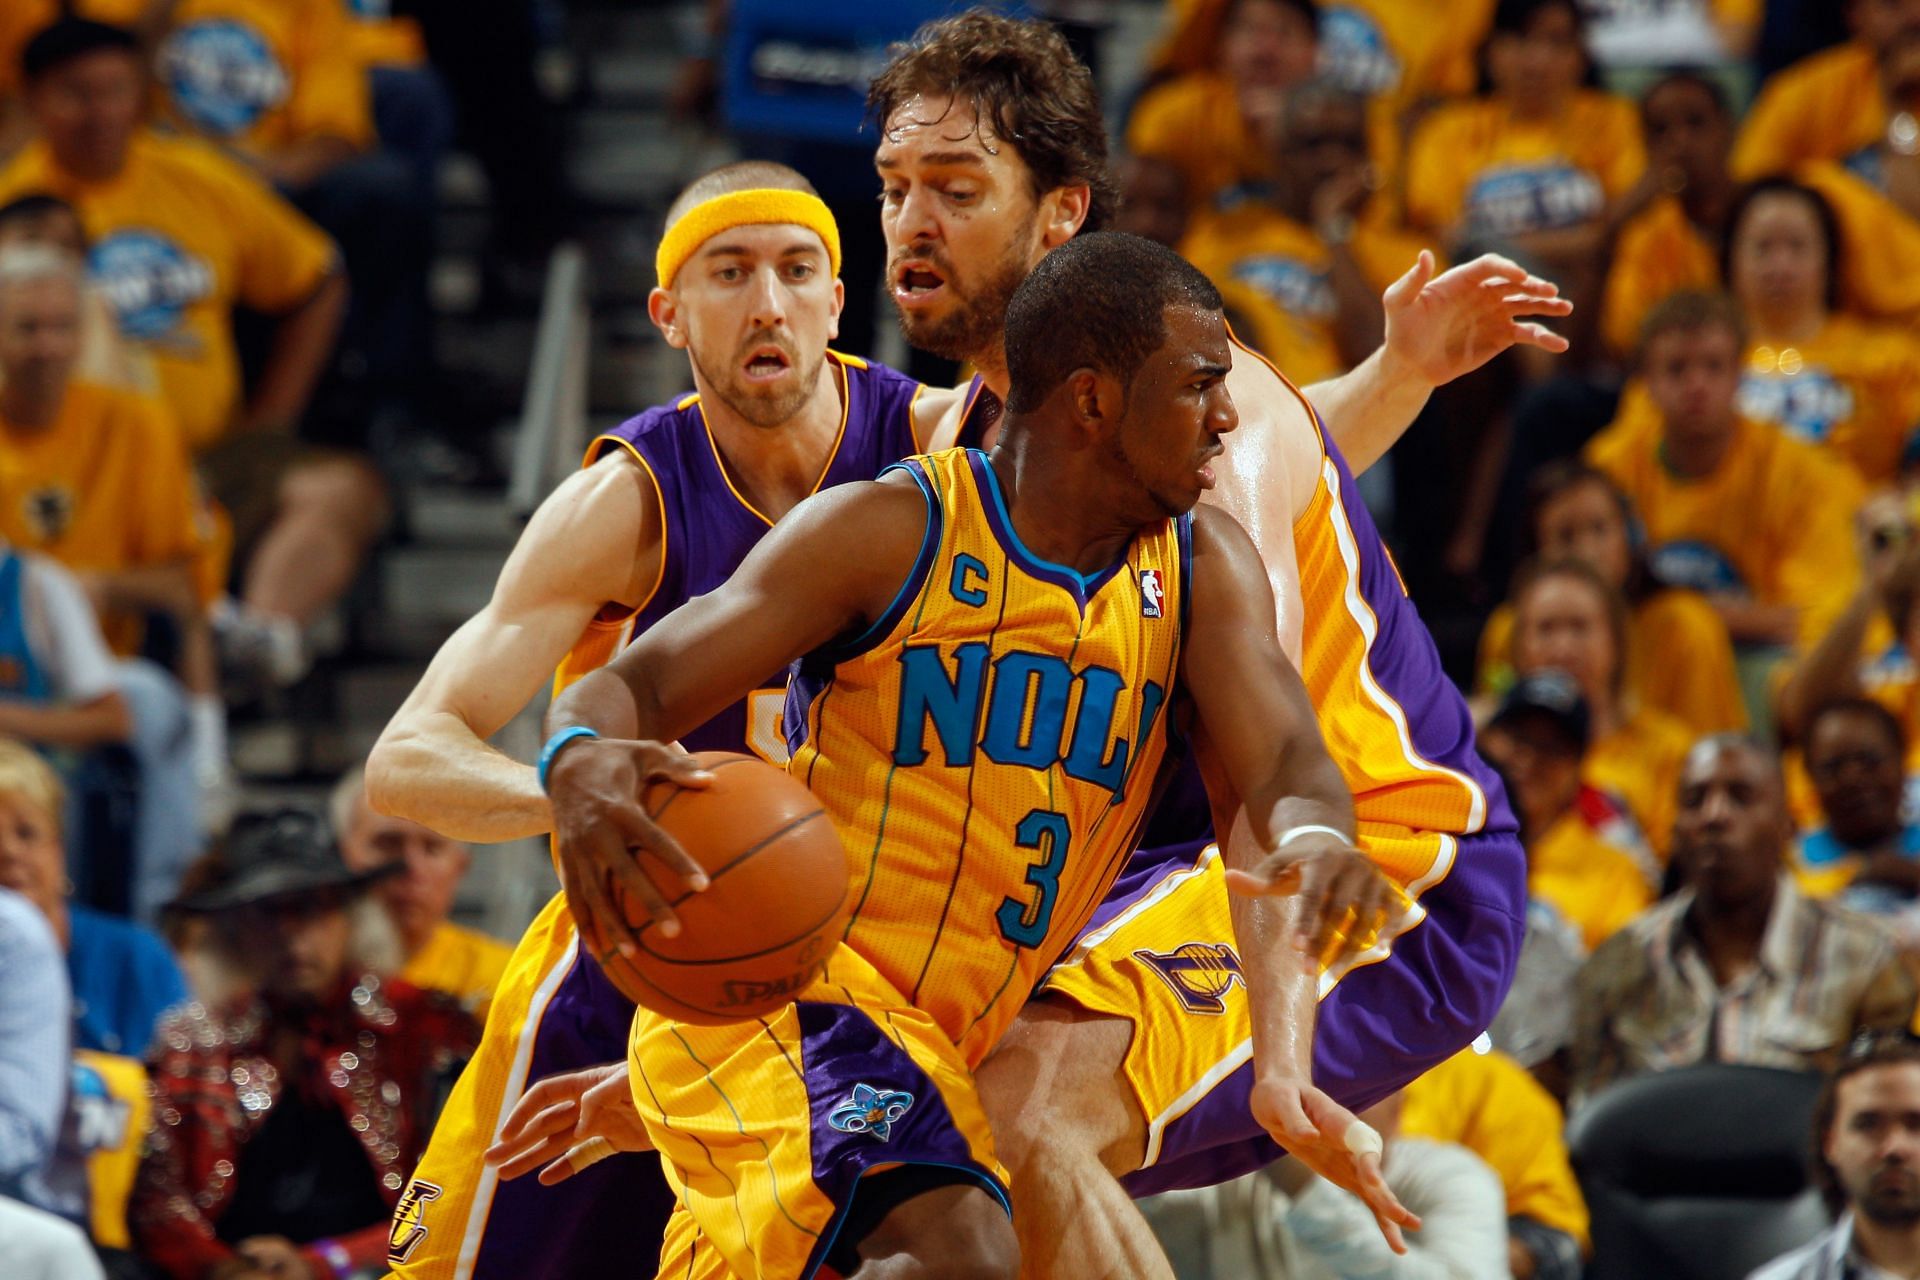 Chris Paul #3 of the New Orleans Hornets drives the ball around Pau Gasol #16 of the Los Angeles Lakers